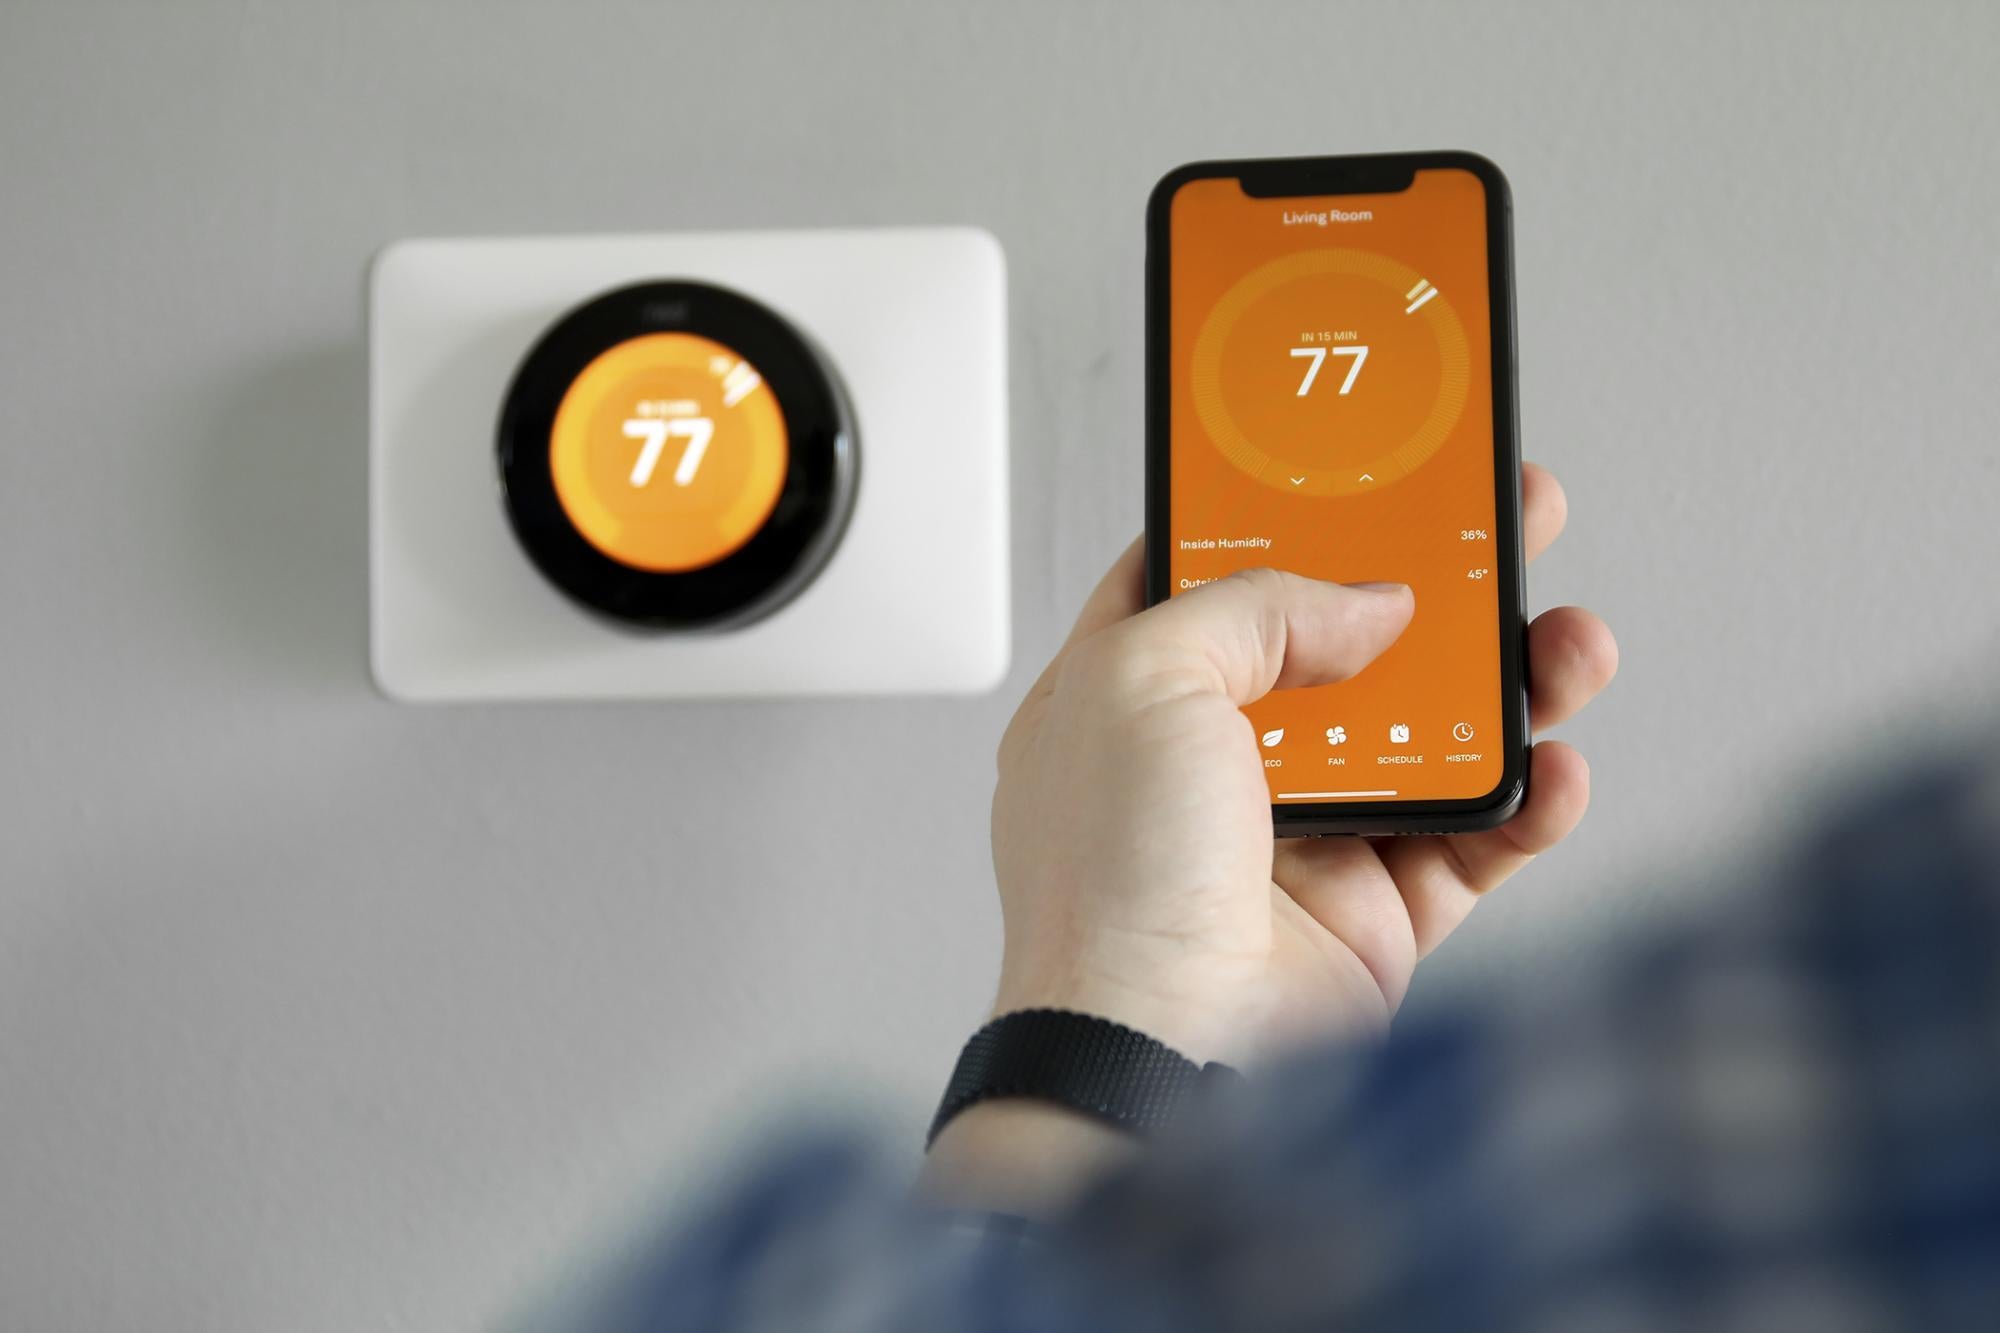 Person holding smart phone with display mirroring the smart thermostat temperature behind it on the wall